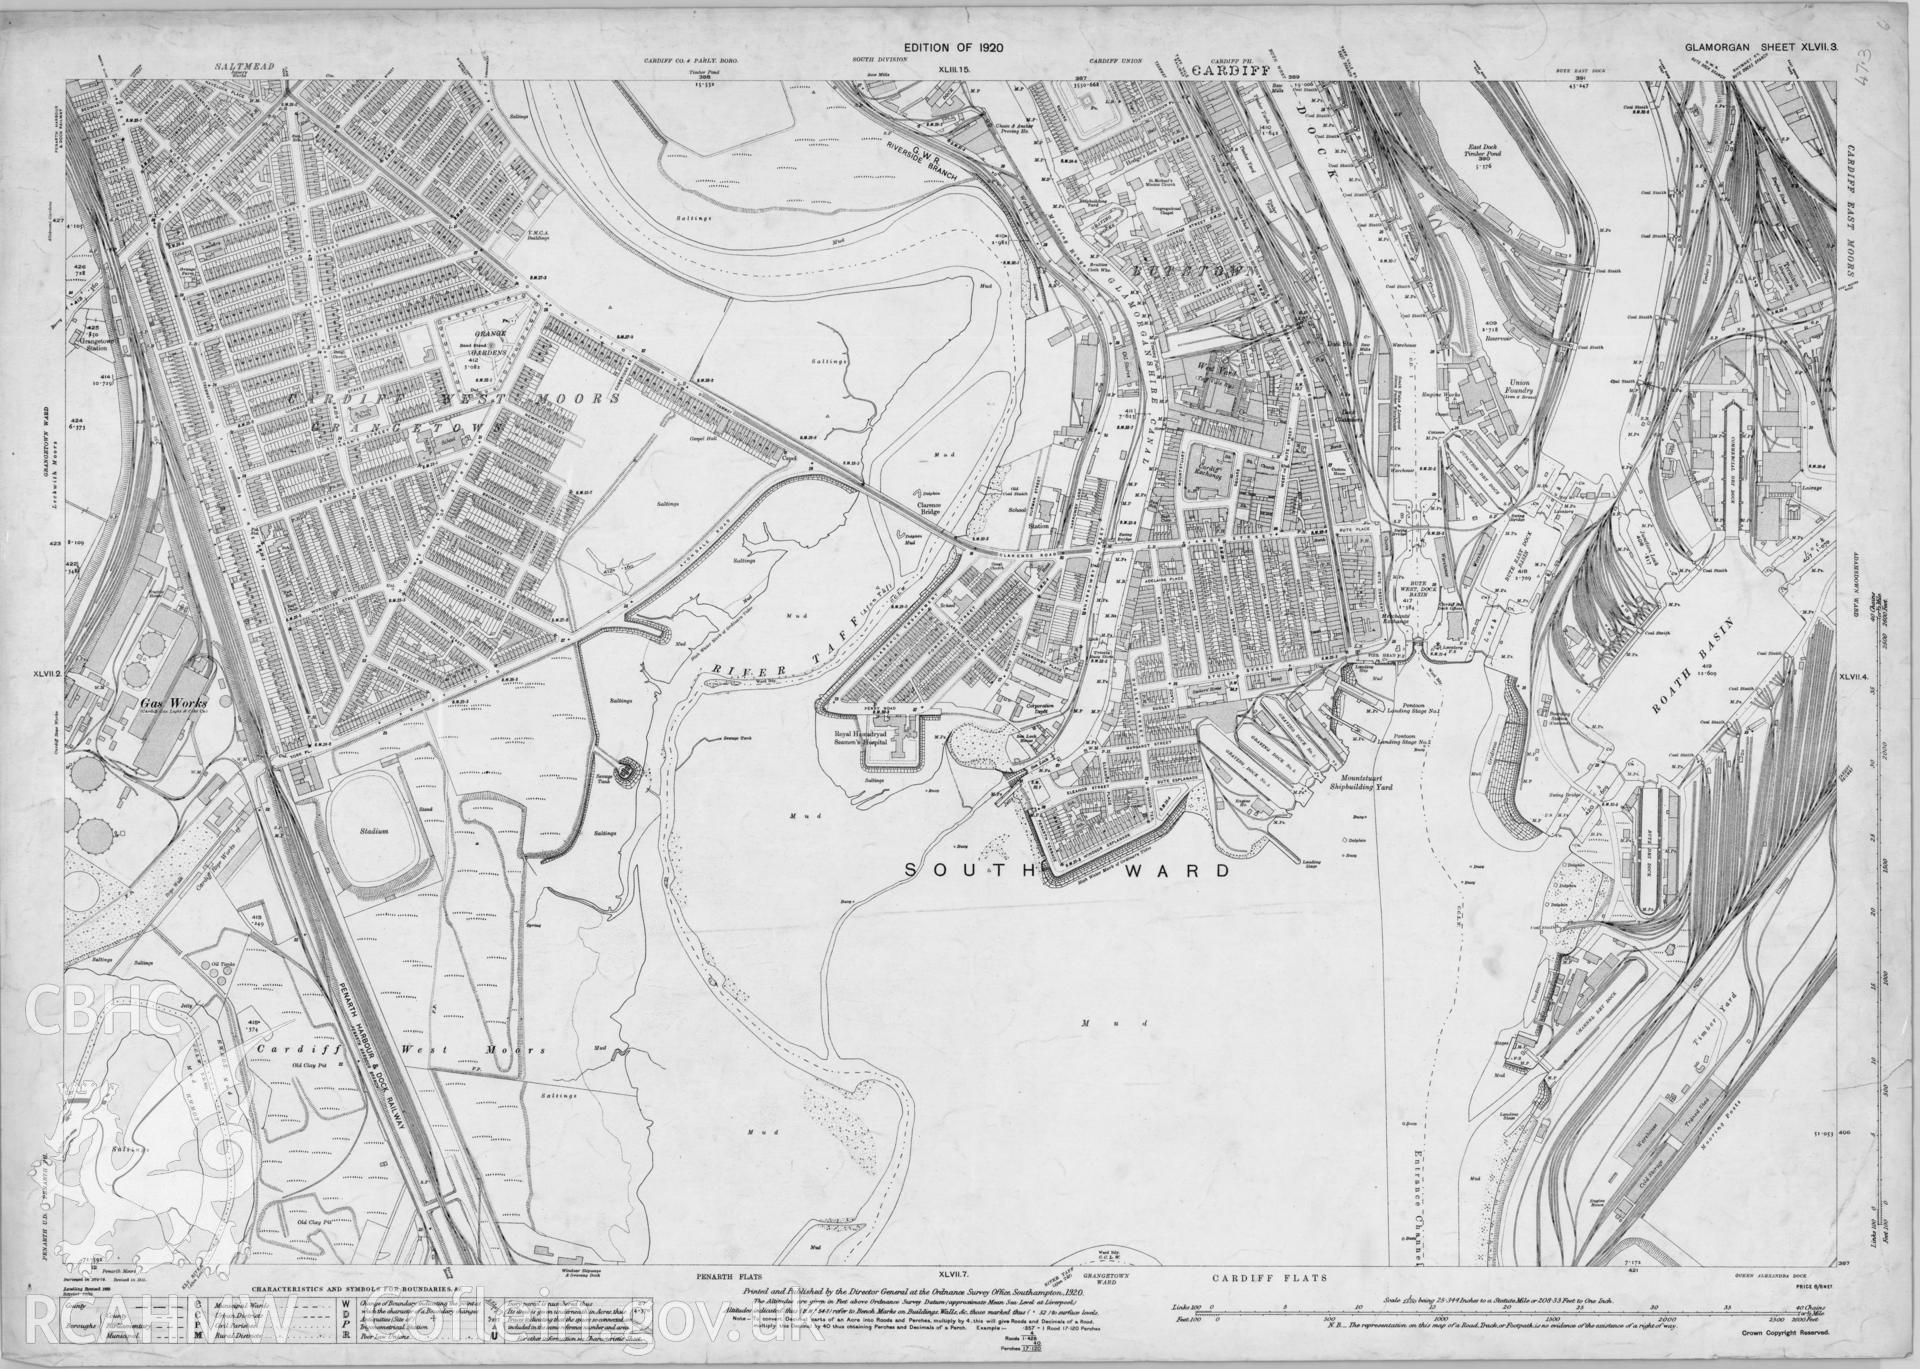 Digitized copy of Ordnance Survey 25 inch 1920 edition map of the Bute district of Cardiff.